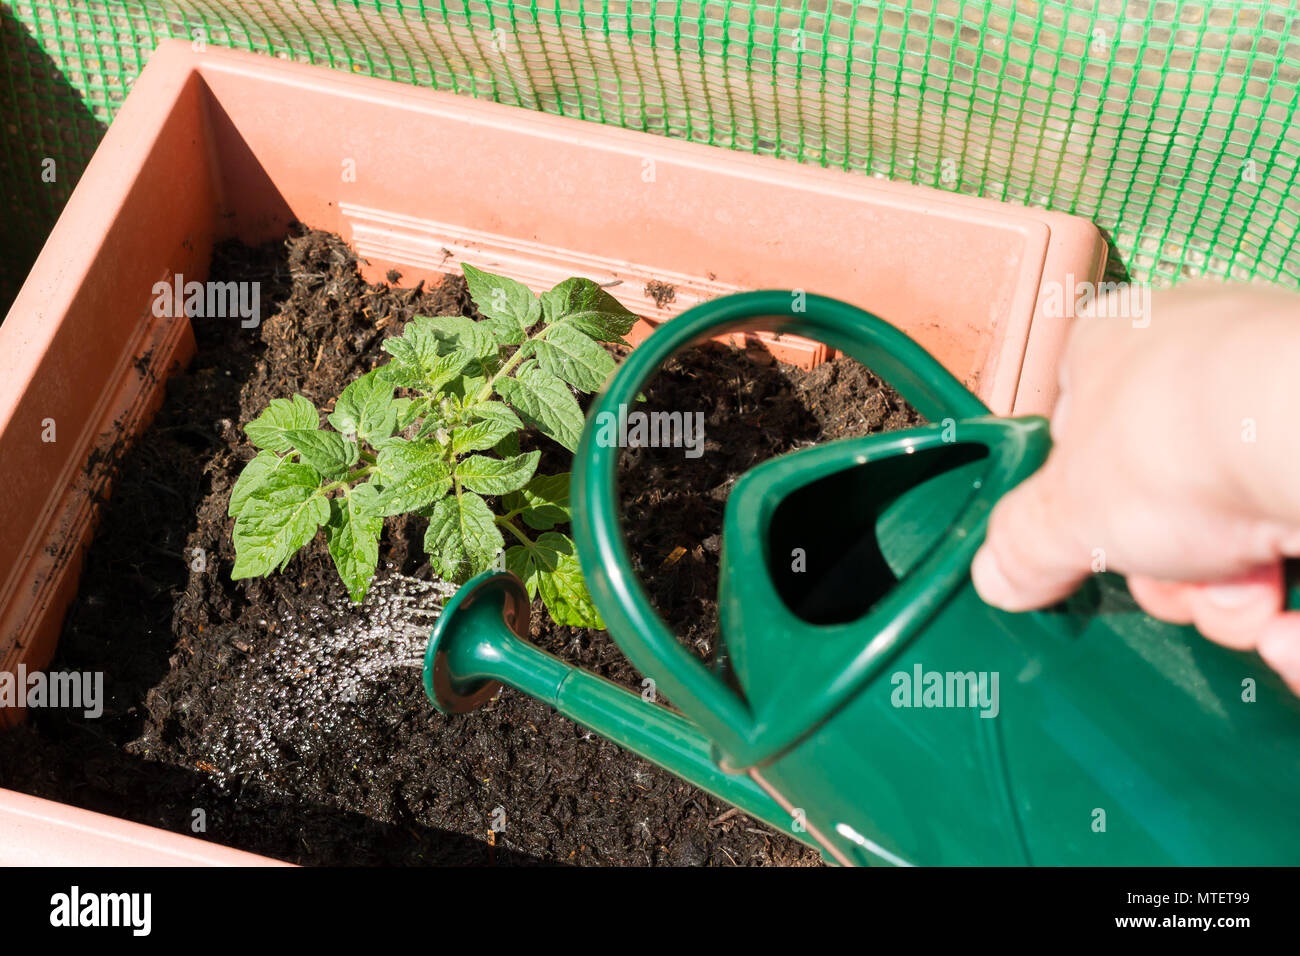 Watering a growing Totem dwarf tomato plant in a garden pot, summertime, Dorset, United Kingdom Stock Photo